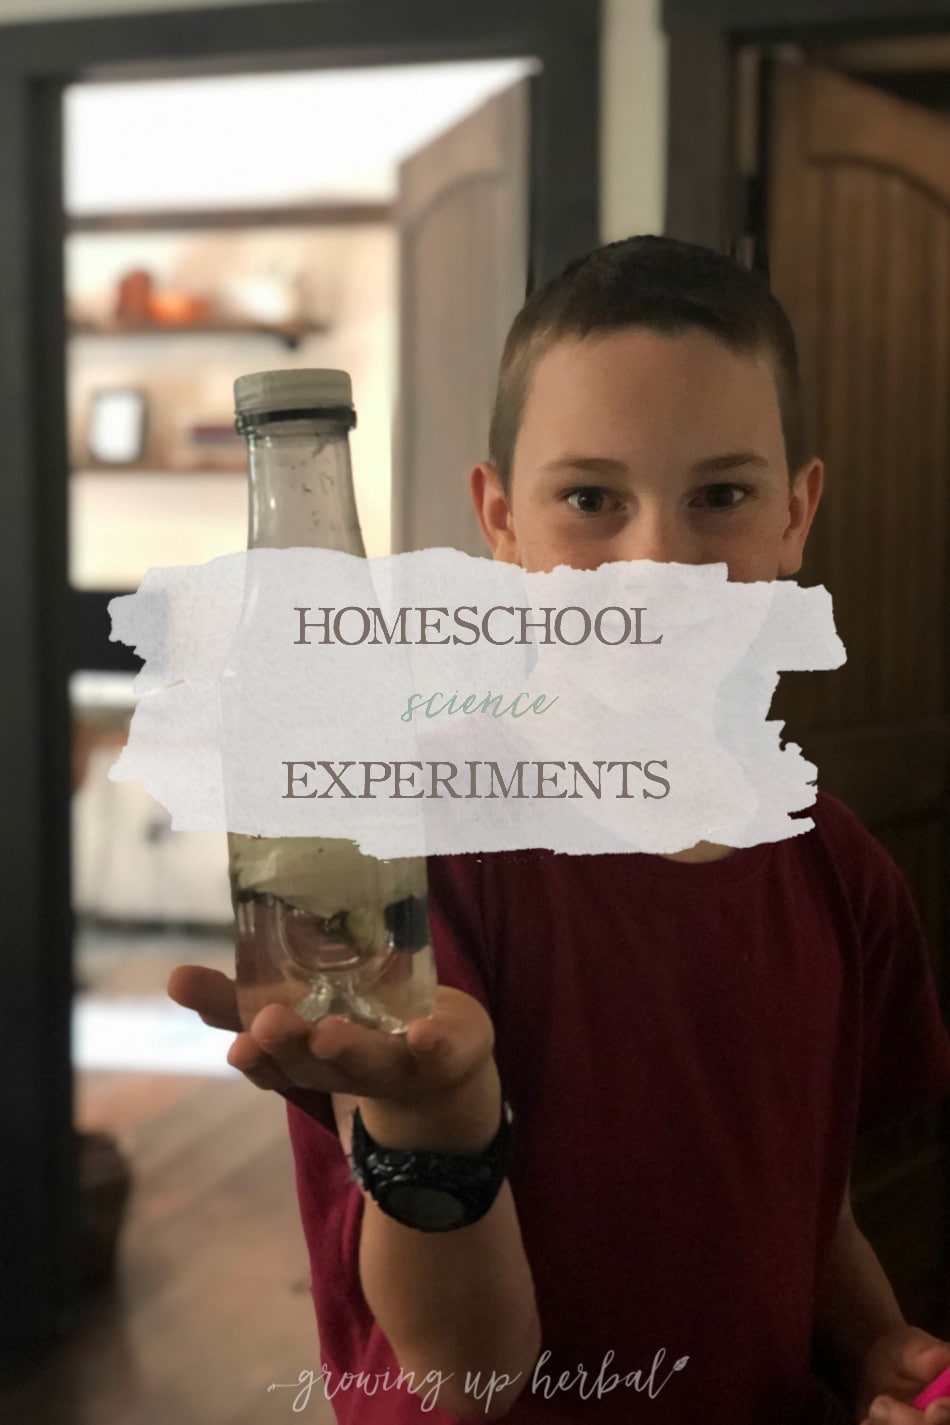 Homeschool Science Experiments | Growing Up Herbal | Let’s talk about homeschool science experiments. How much time and effort do you put into them in your homeschool schedule?